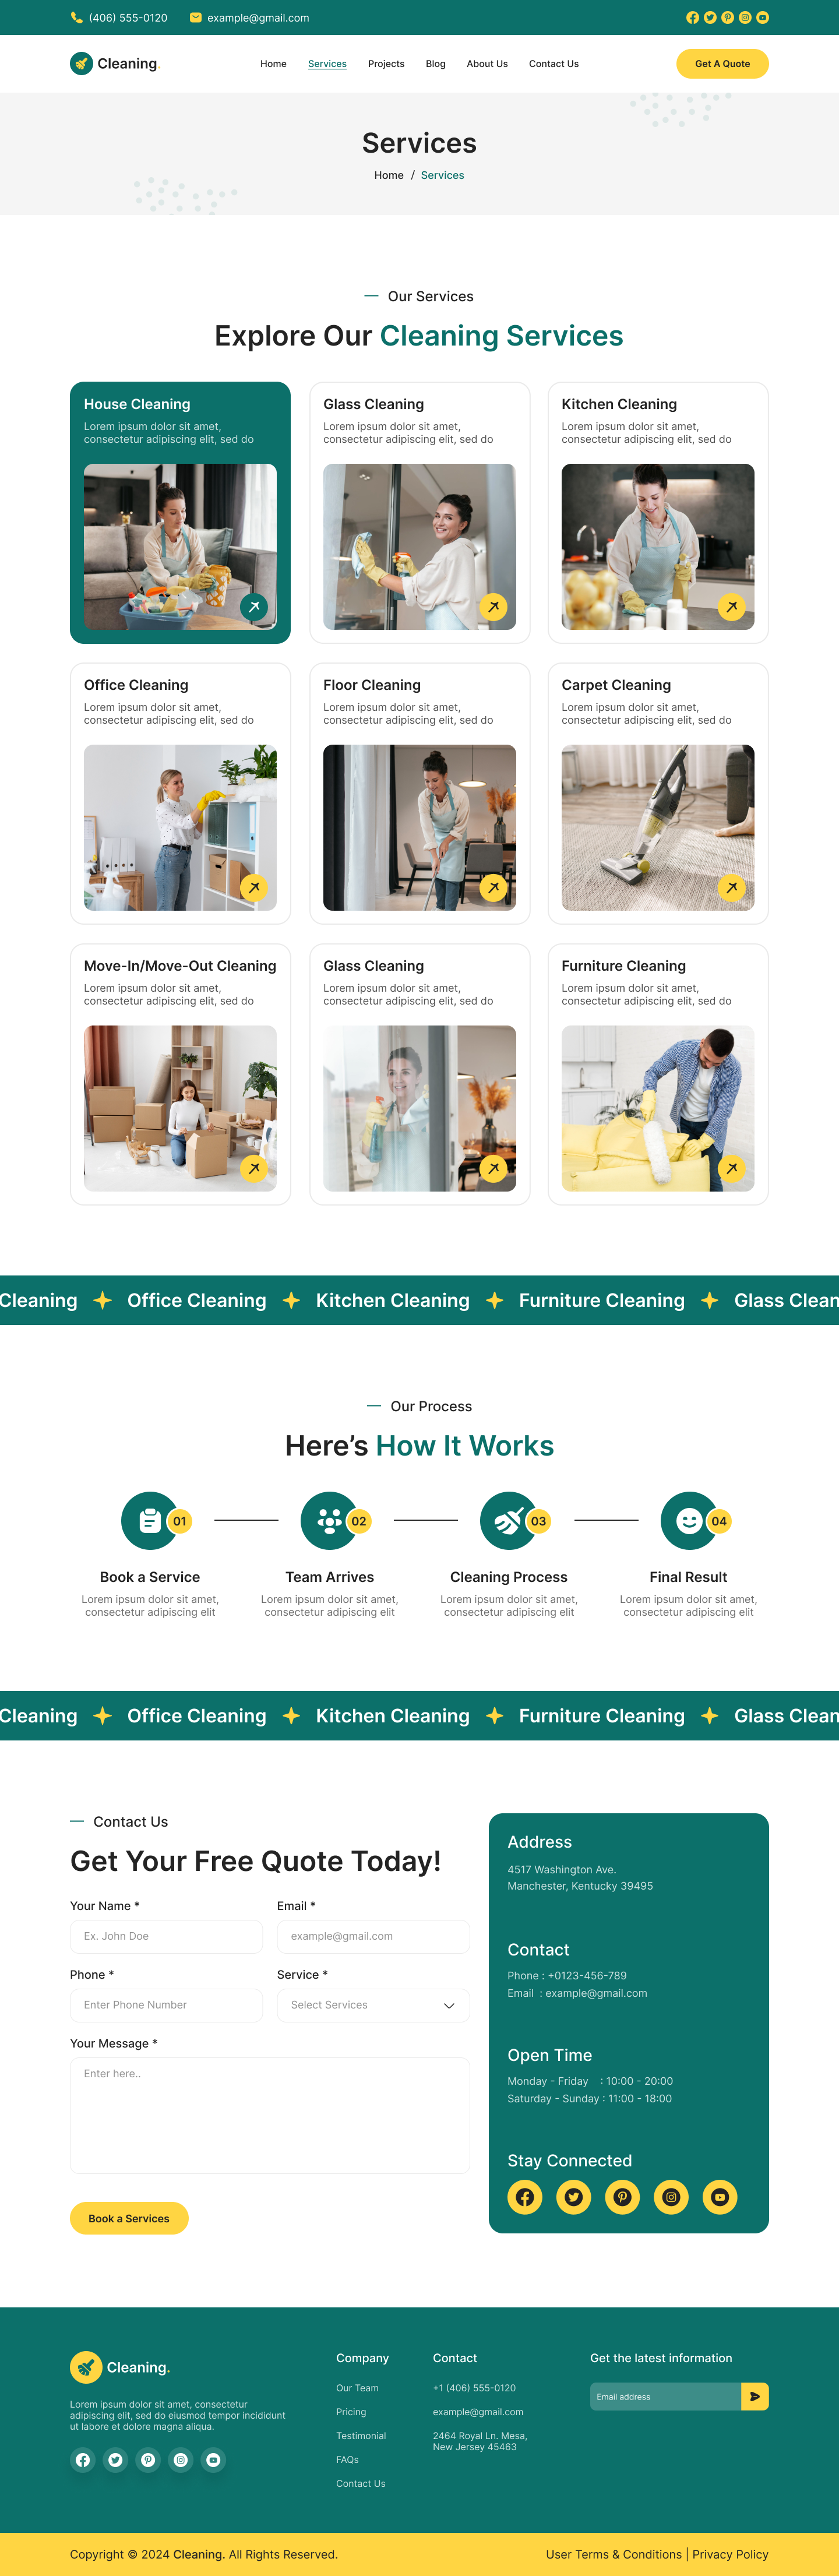 cleaning service website Service Page figma design